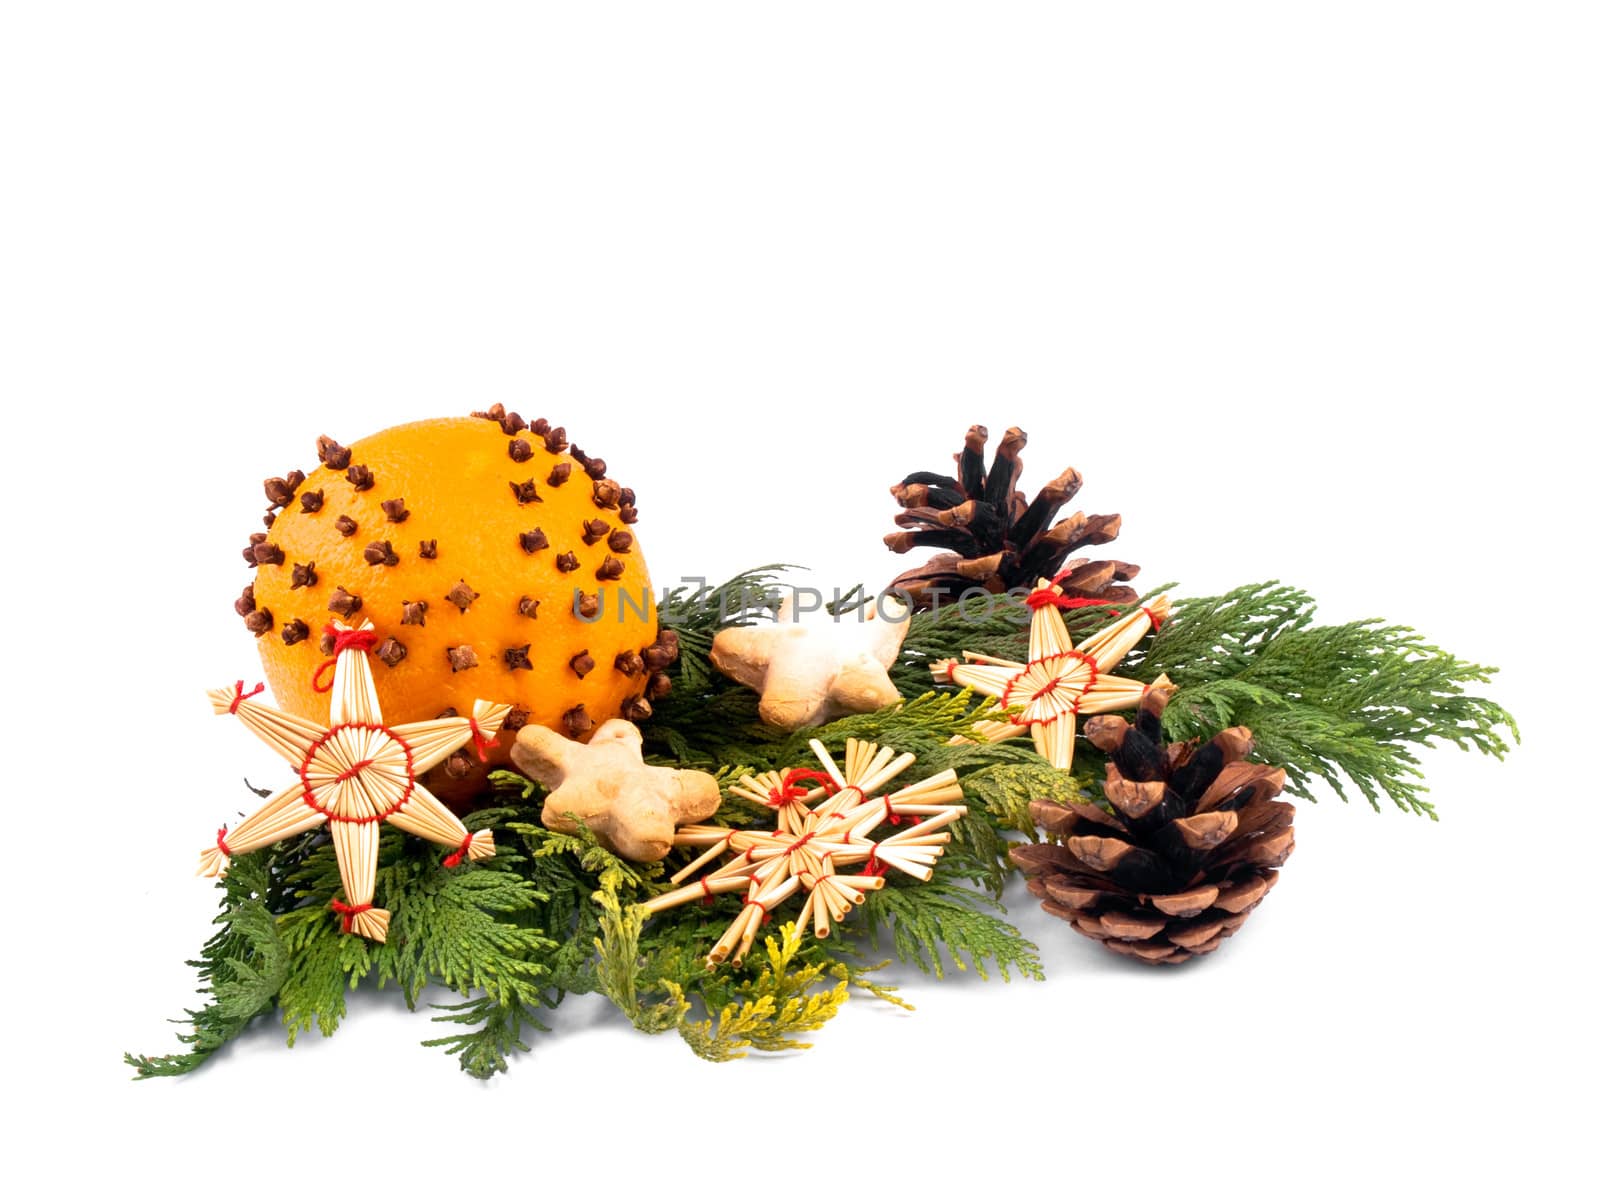 Orange with cloves and christmas ornaments by mrsNstudio